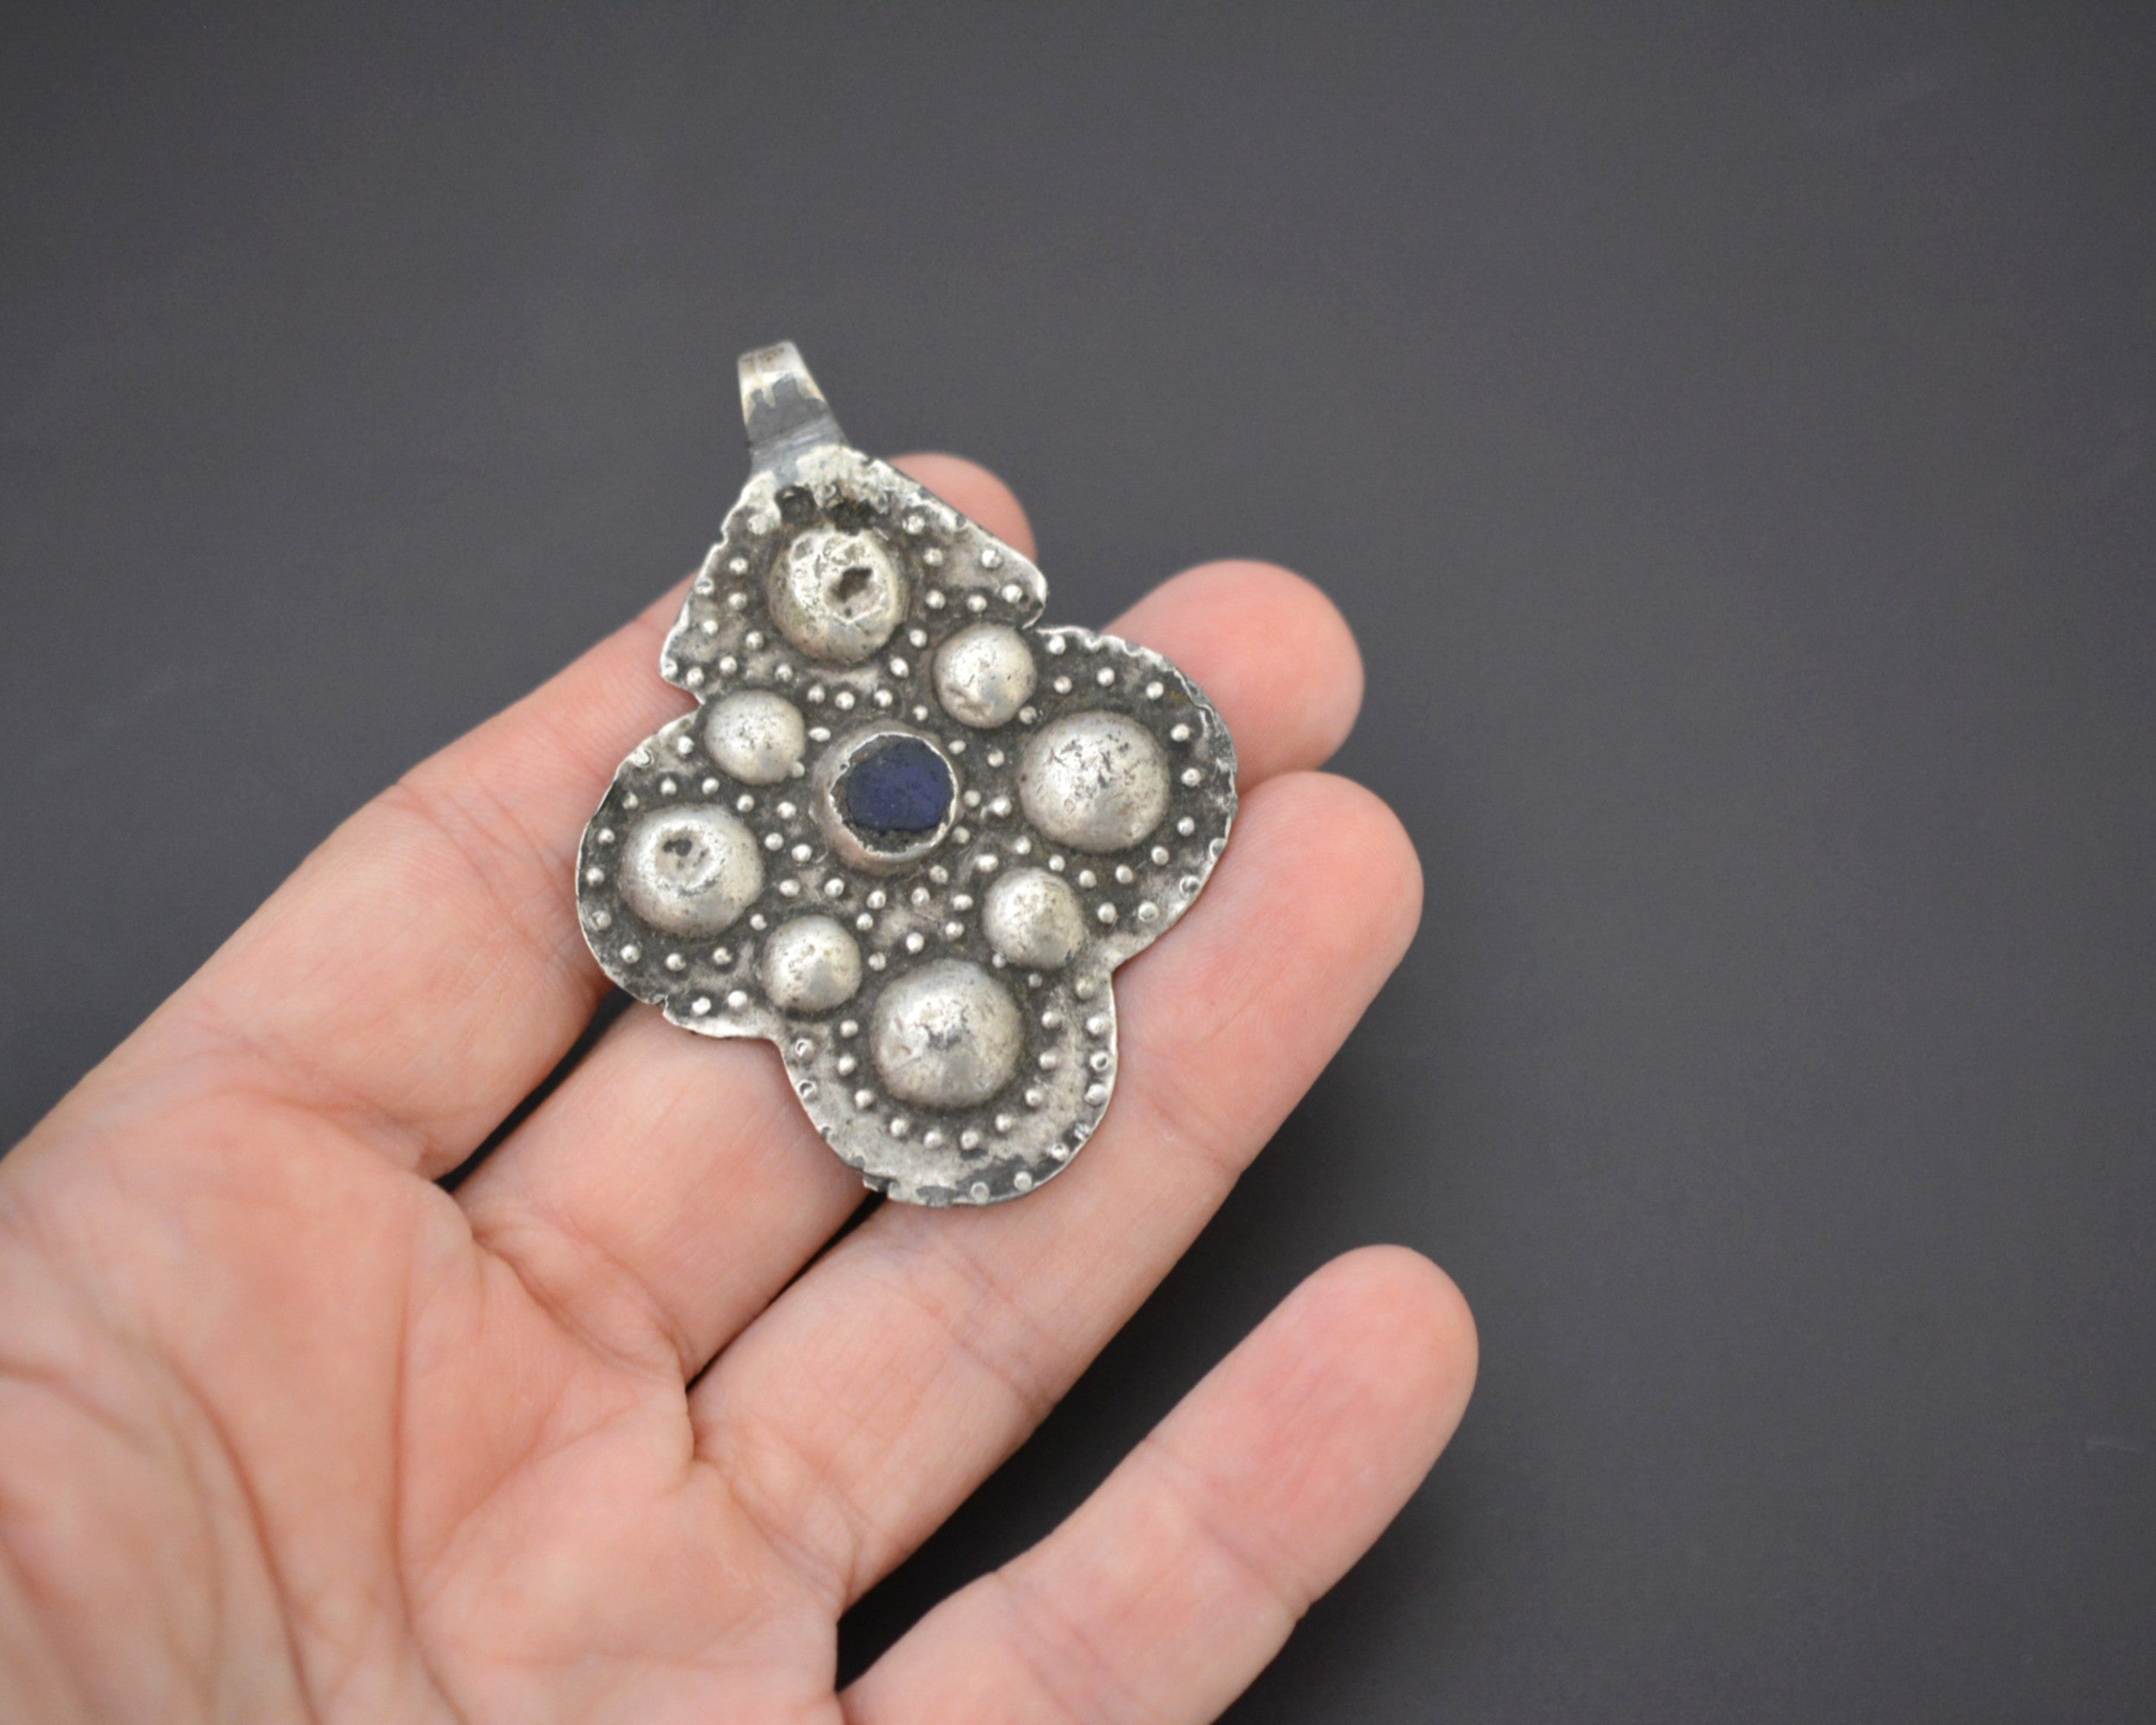 Berber Silver and Glass Pendant